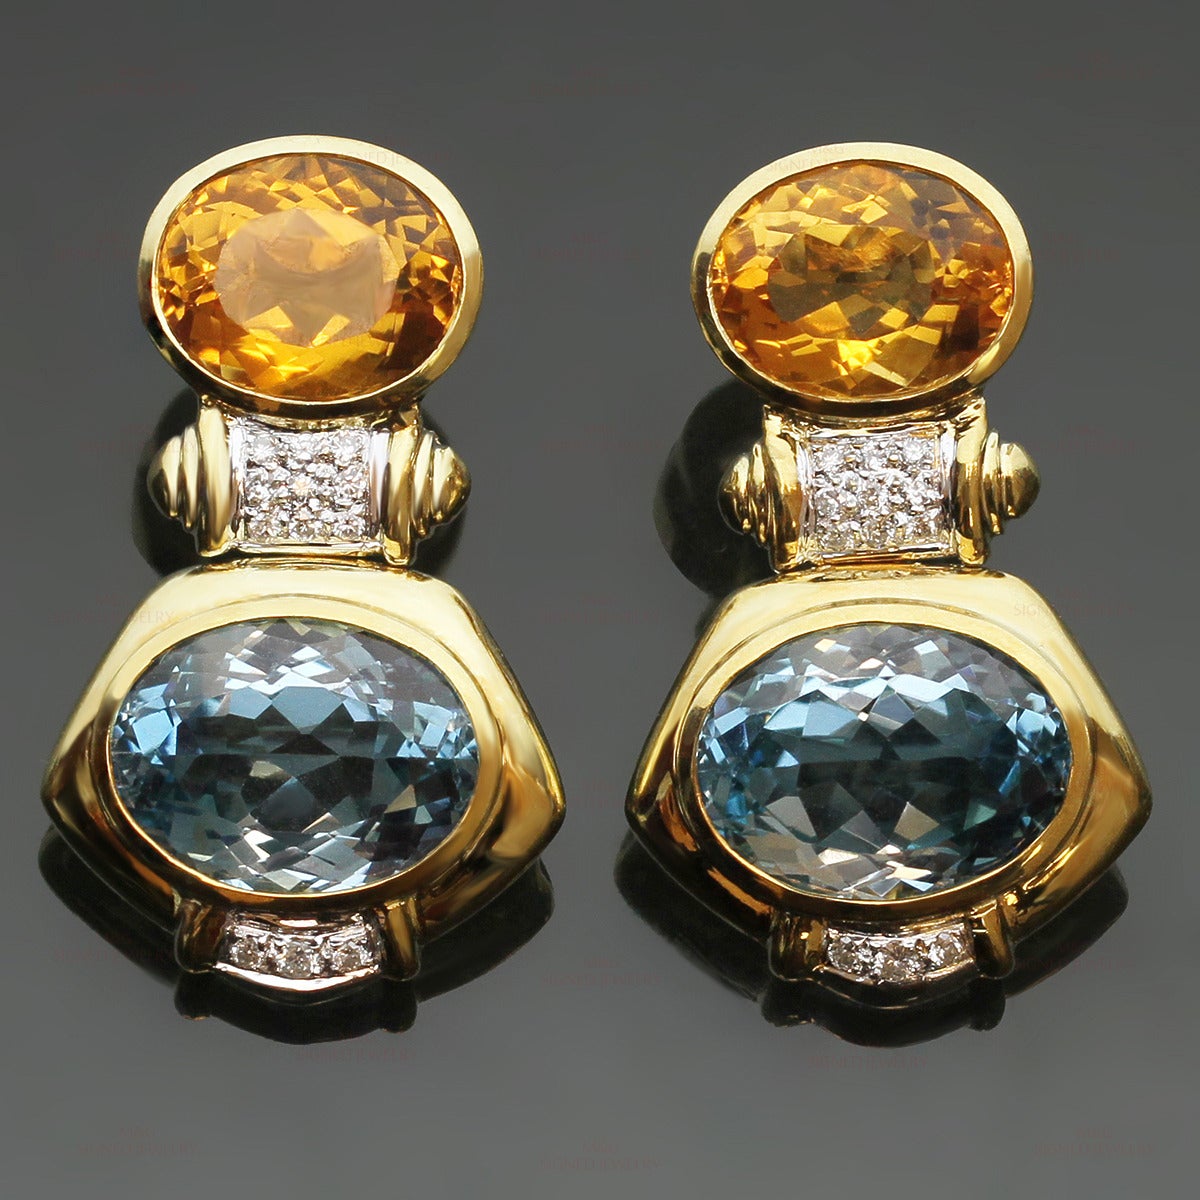 These chic and elegant earrings are made in 18k yellow gold and set with faceted oval blue topaz stones measuring approximately 12.0mm x 16.0mm and faceted oval orange citrine stones measuring approximately 10.0mm x 13.0mm, accented with pave